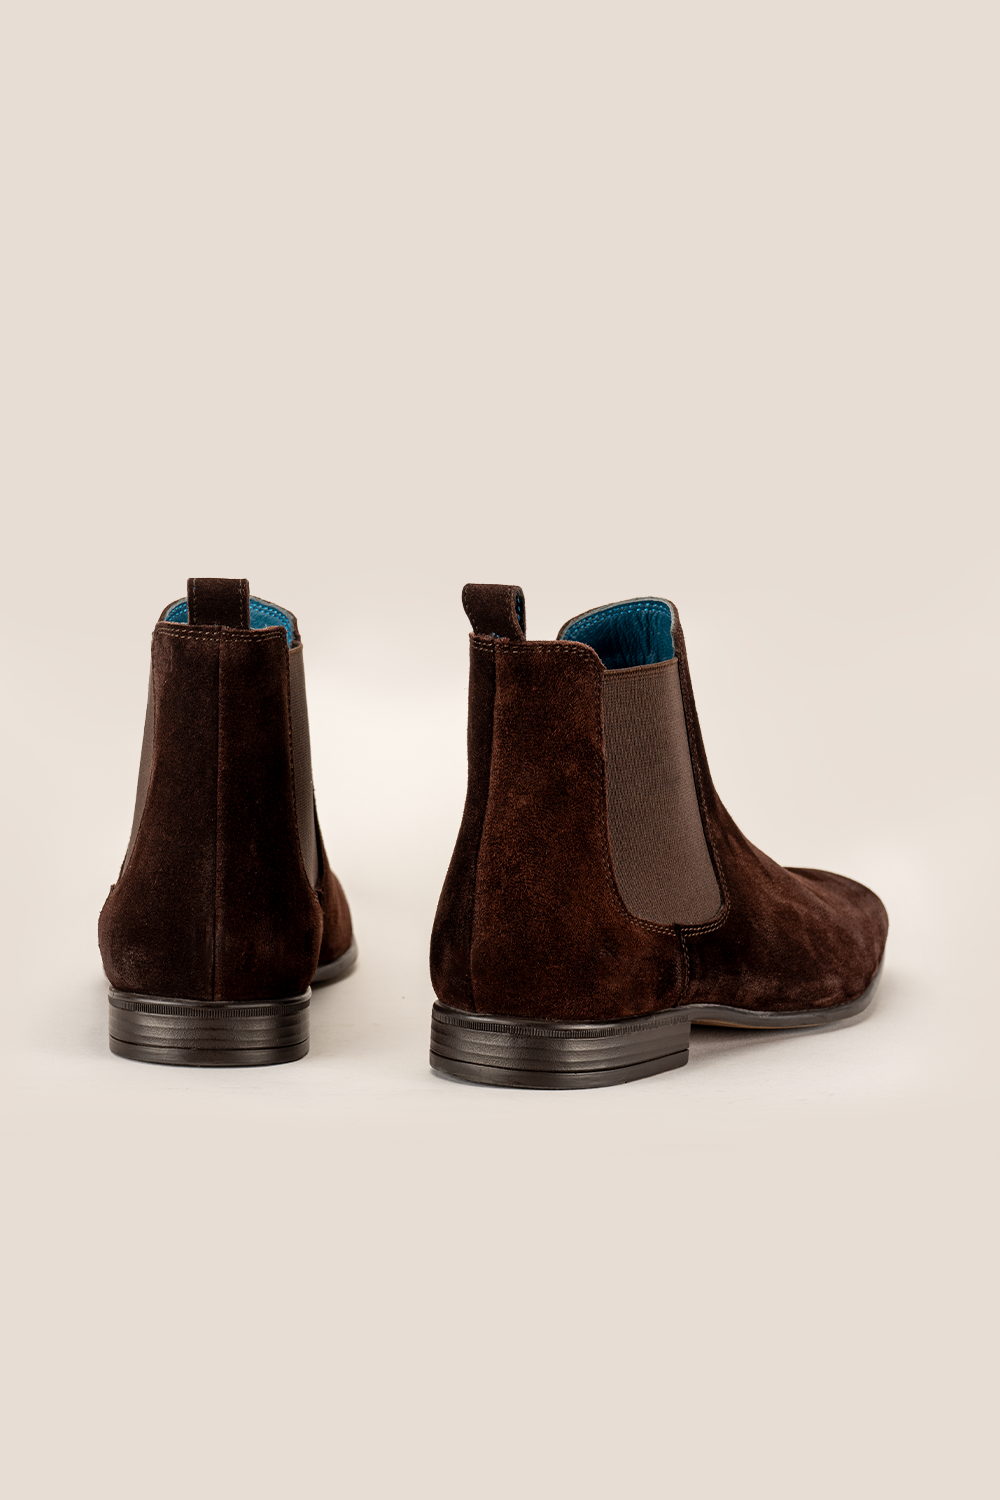 Oswin Hyde Darwin  Brown suede boots for Men